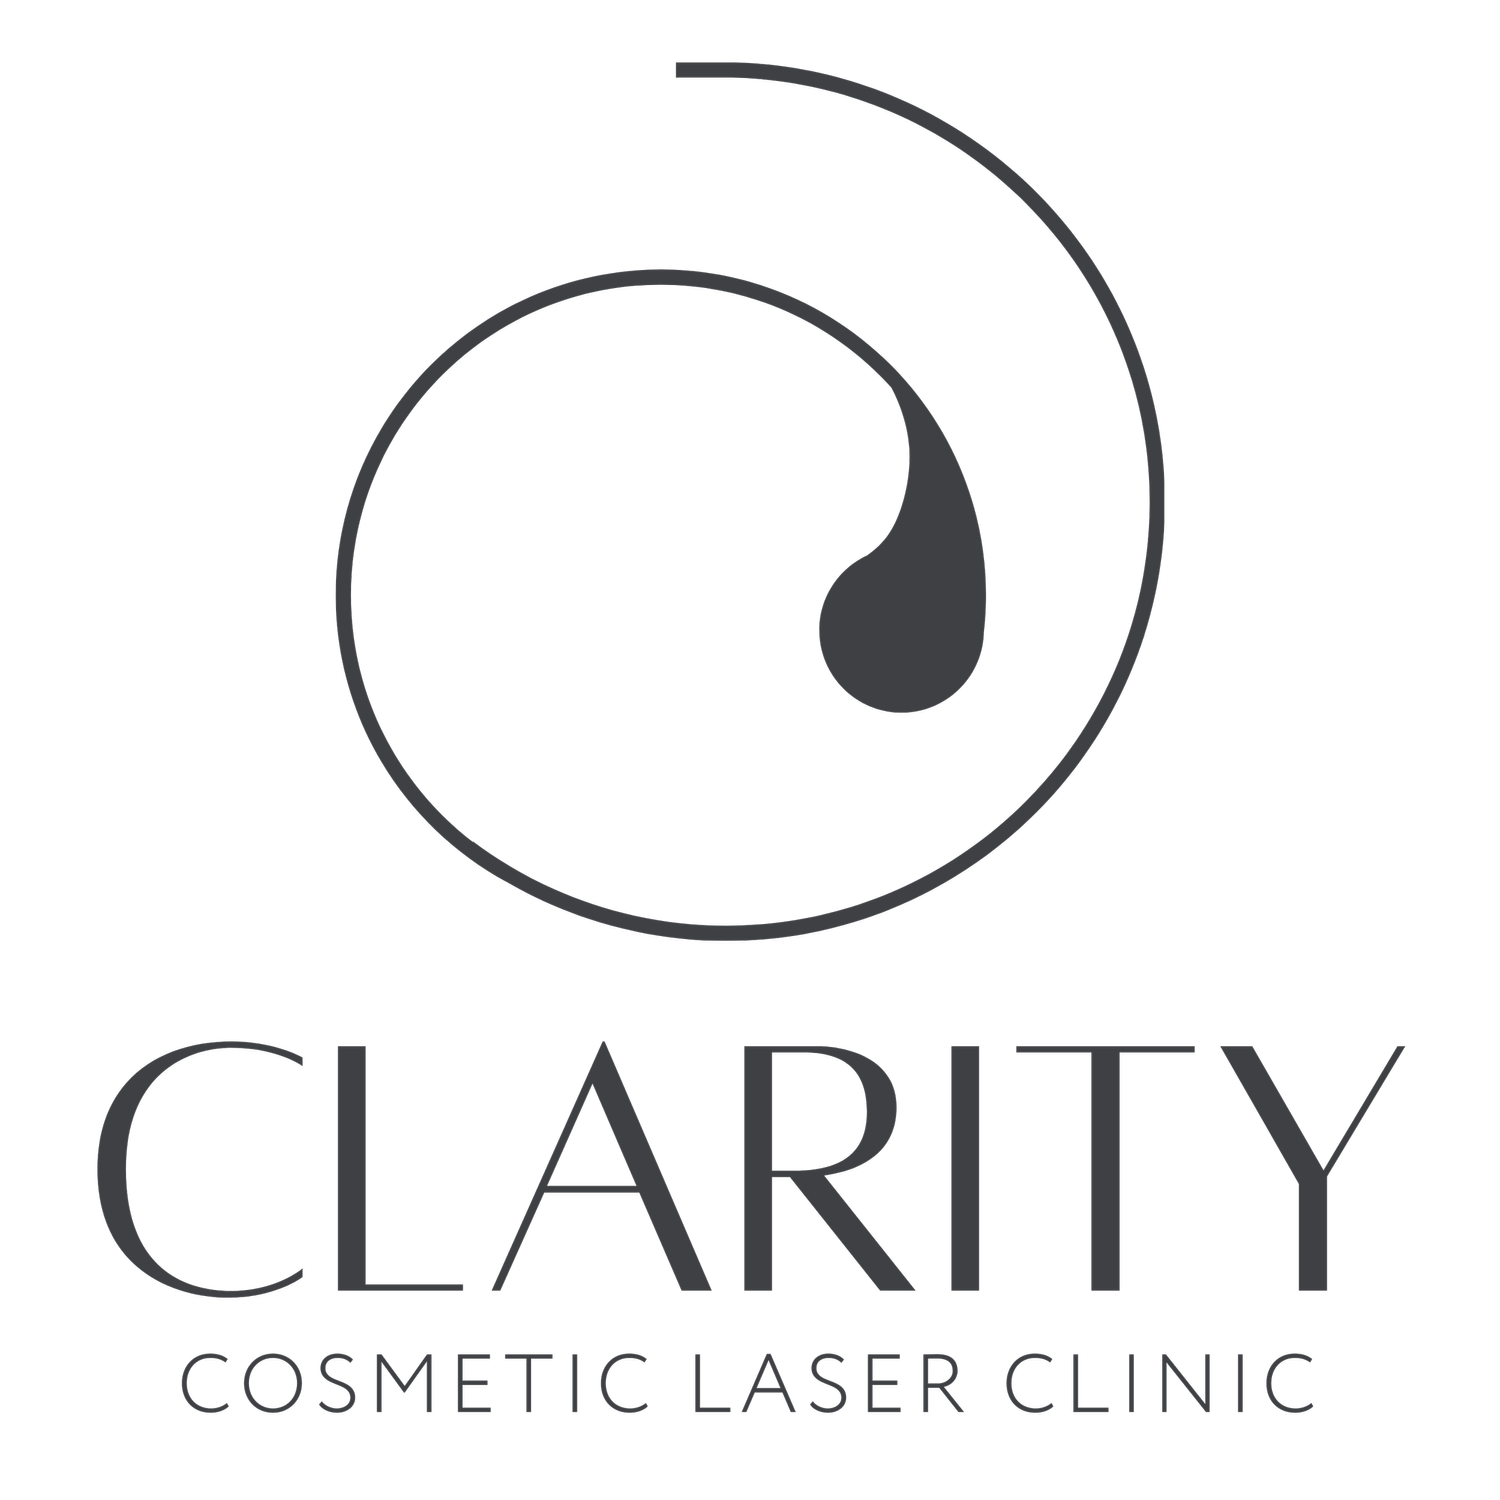 Clarity Cosmetic Laser Clinic